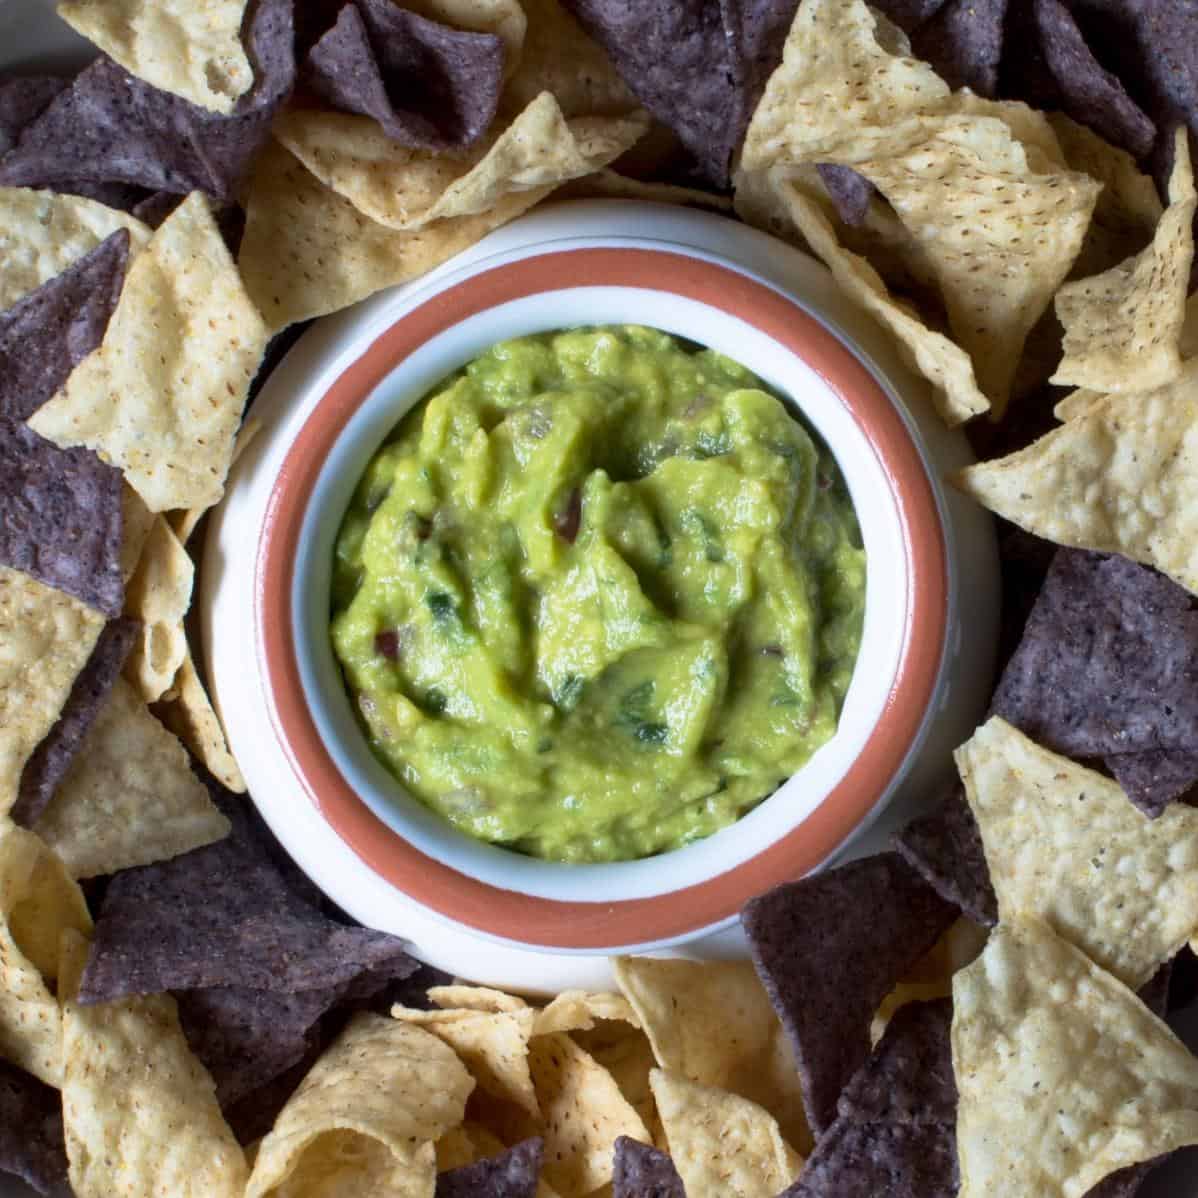  Say goodbye to store-bought guacamole and hello to this homemade, flavor-packed version!